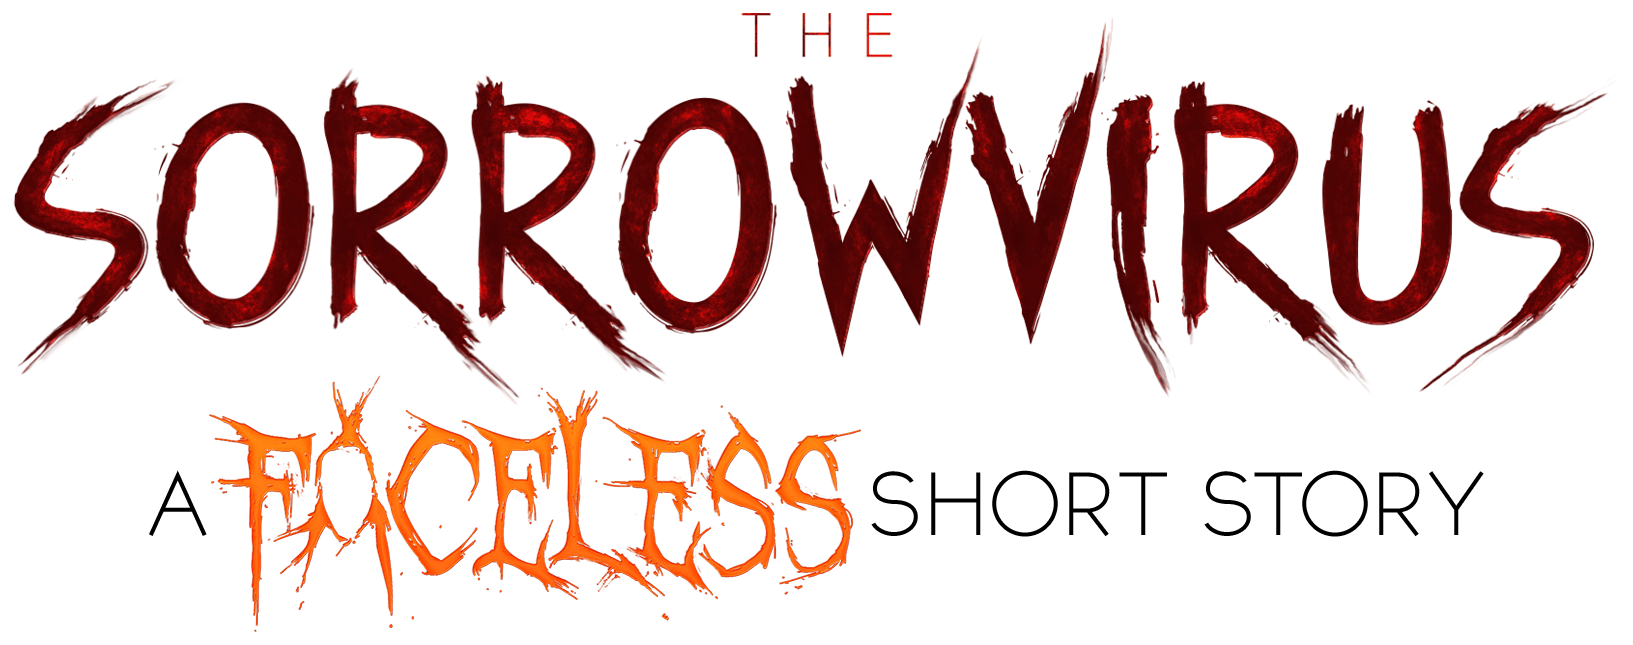 The Sorrowvirus: A Faceless Short Story - all endings and more.. - Achievements showcase